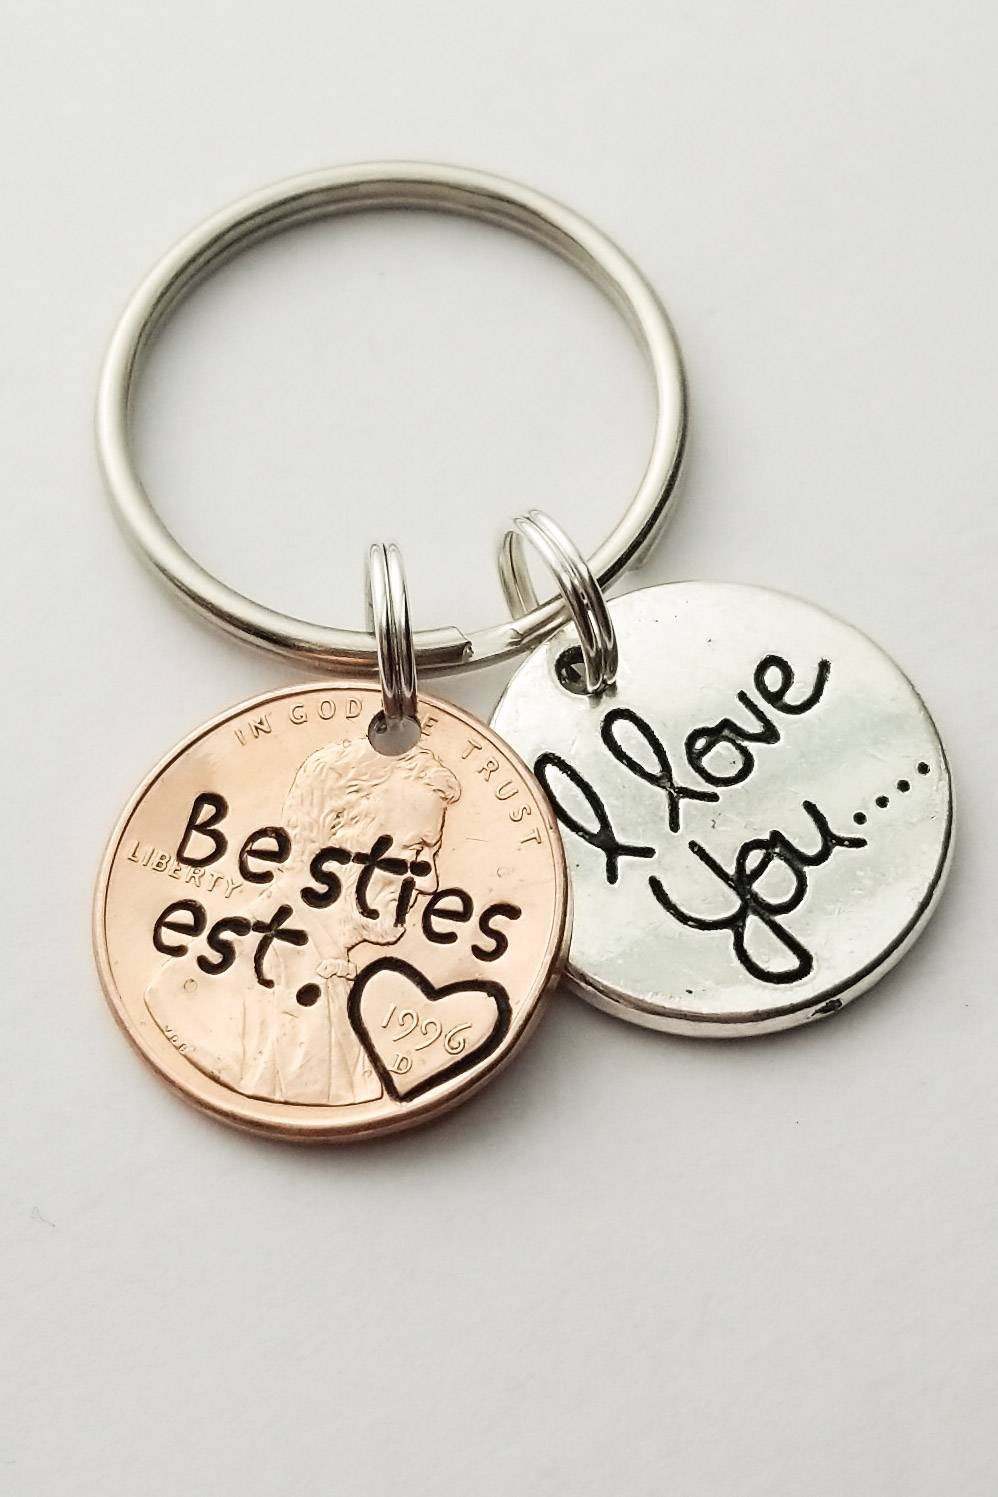 Customized Best Friend Gift, Stamped Penny Keychain Personalized with Your Text, With "I Love you" Charm